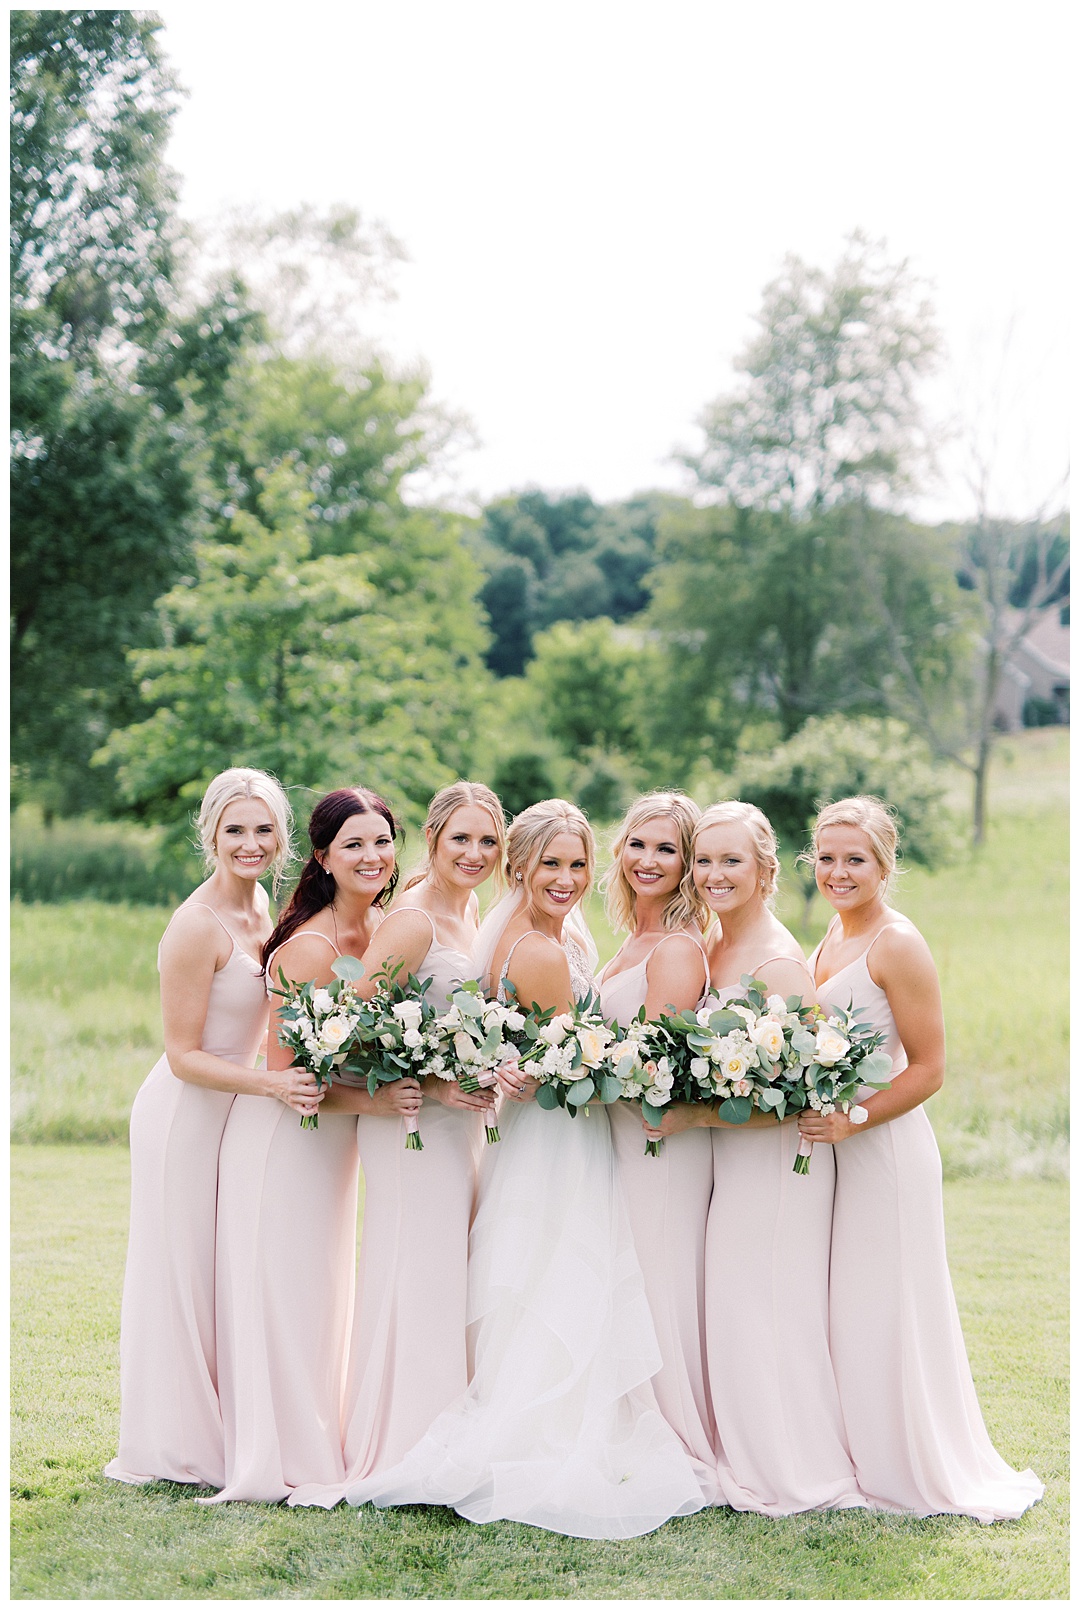 Bridesmaids in Blush Lush Backyard Wedding on Film Featured on Magnolia Rouge with Sarah Sunstrom Photography